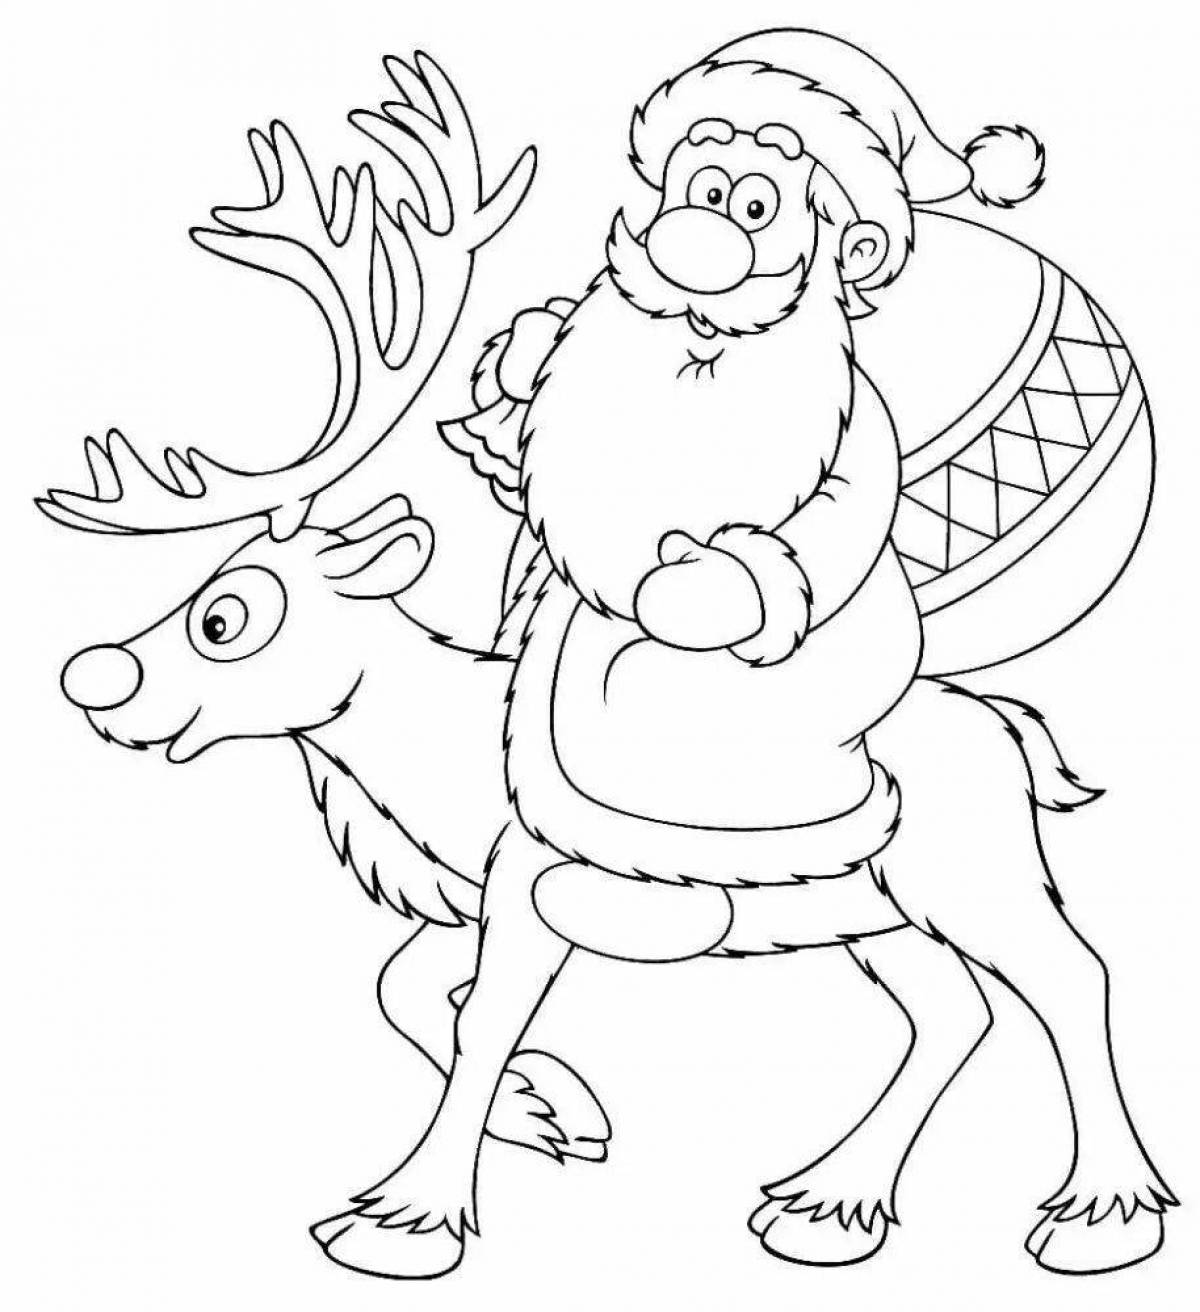 Glittering Christmas reindeer coloring book for kids